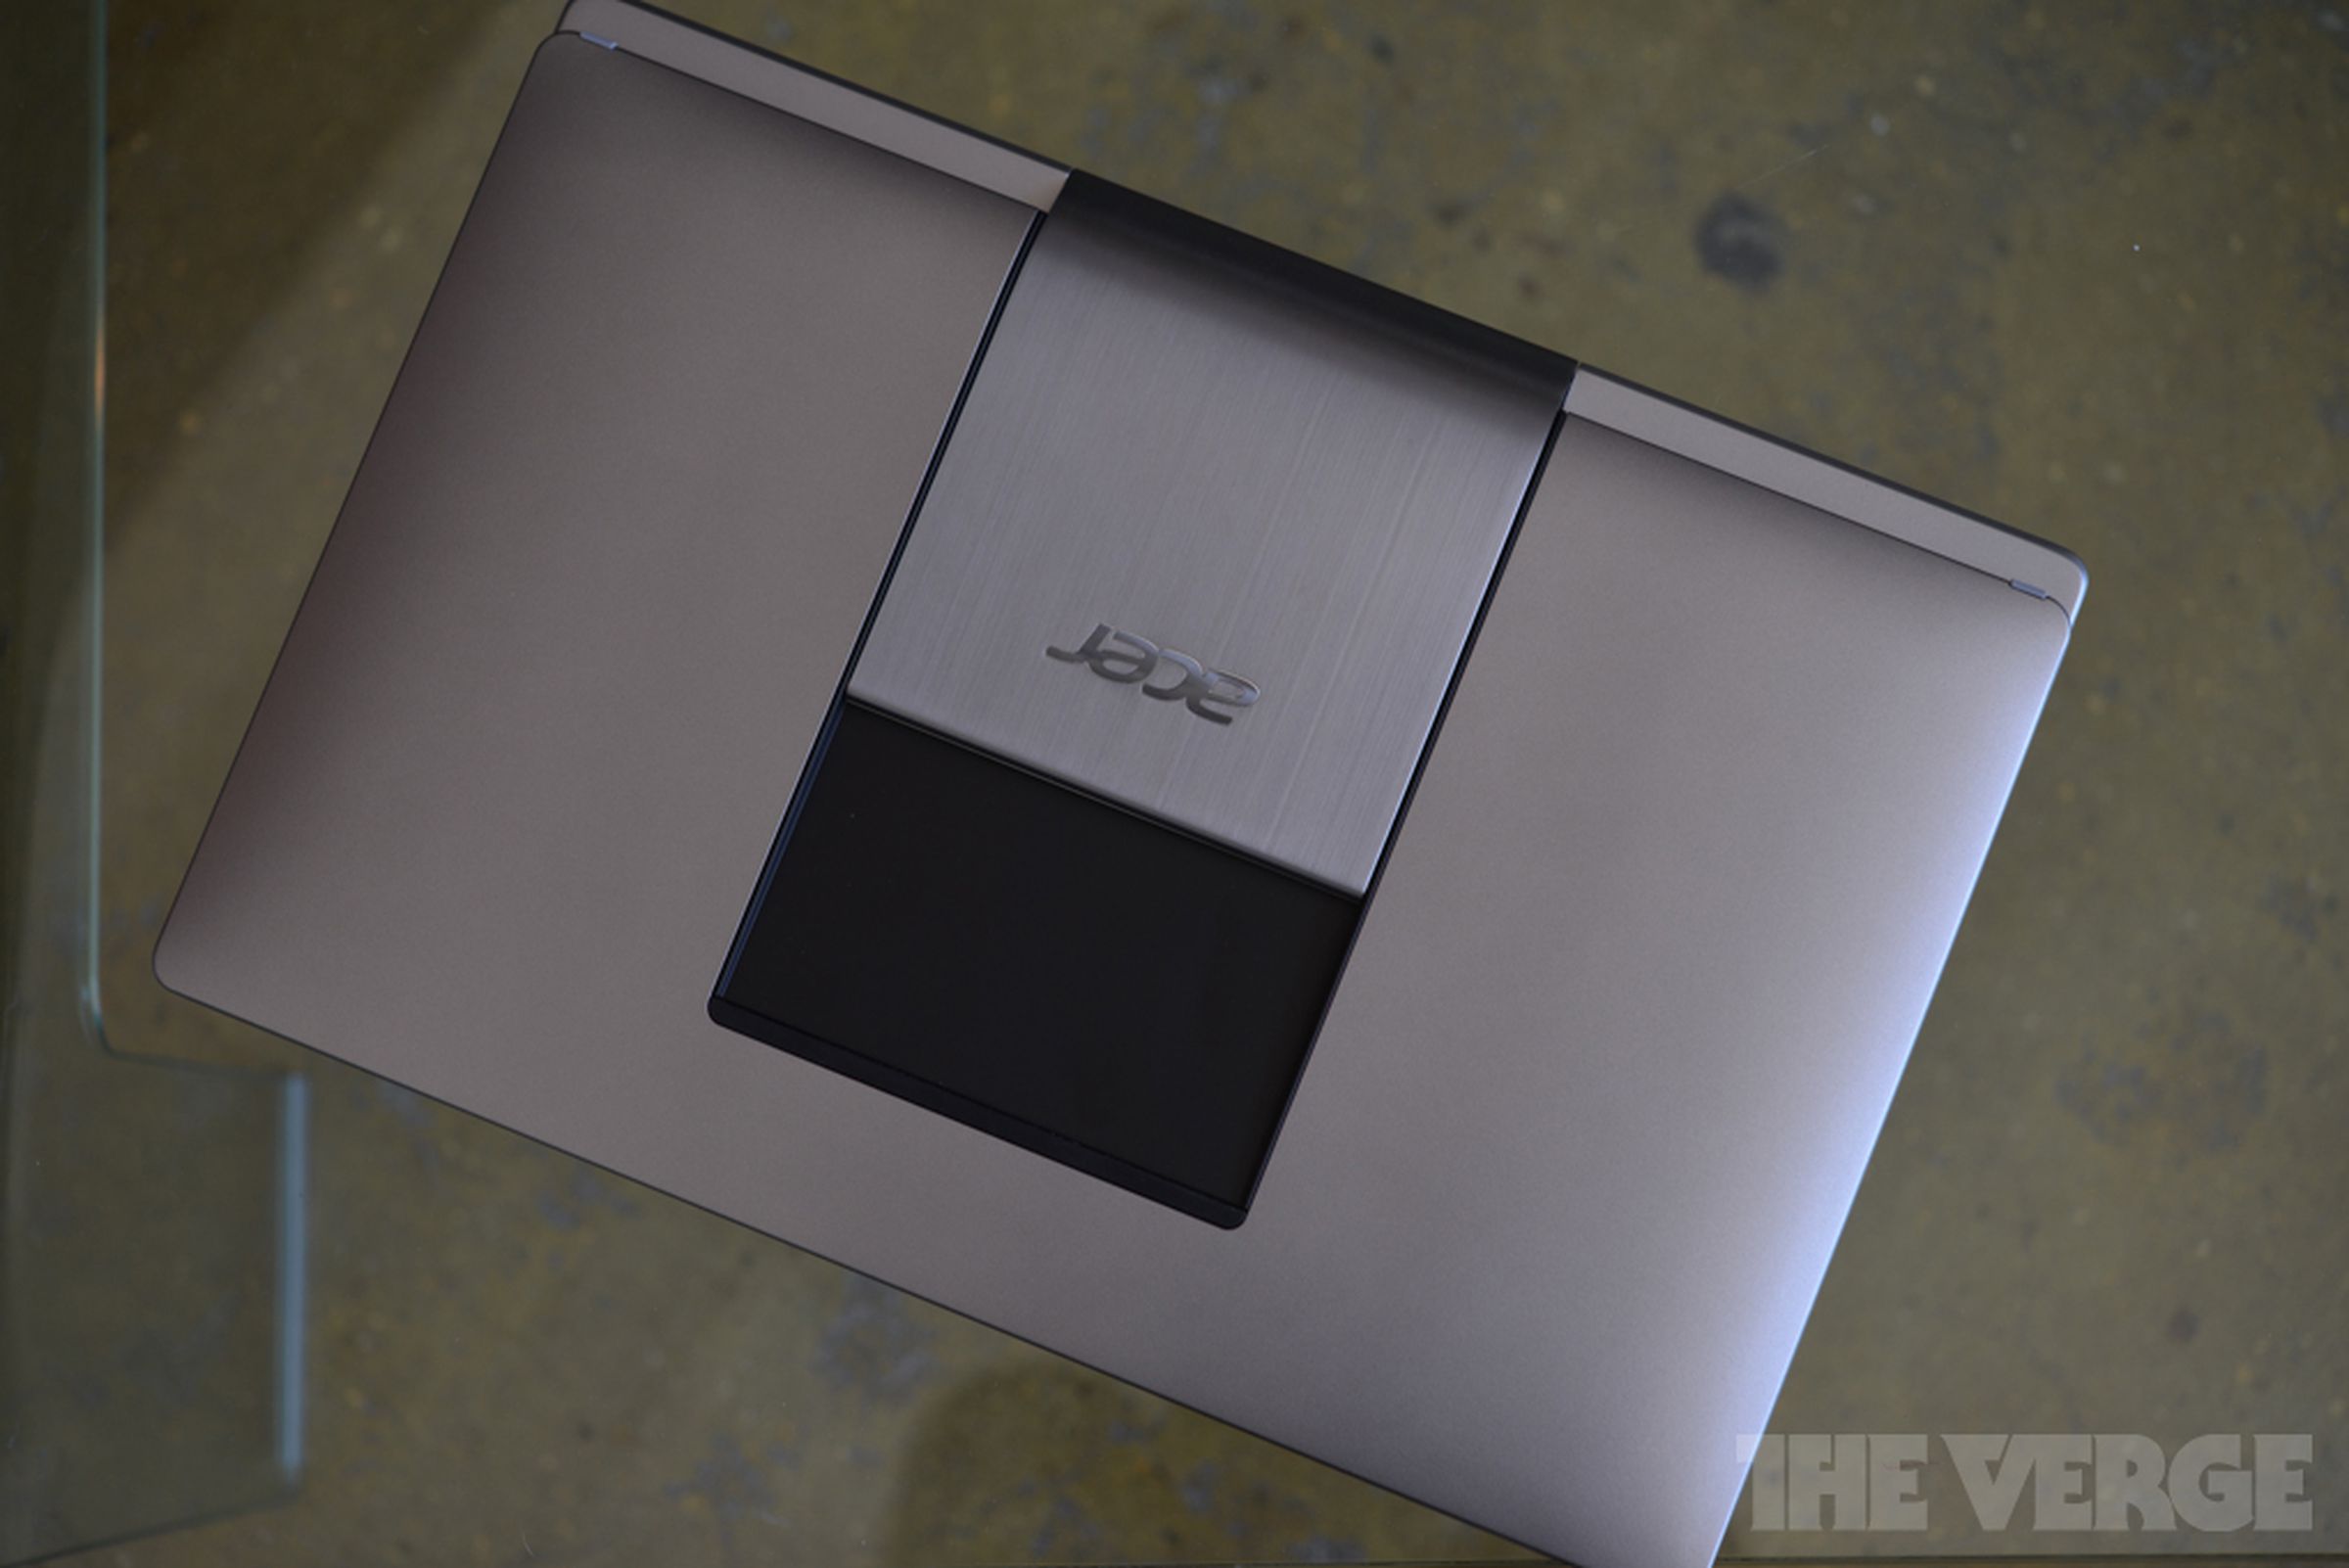 Acer Aspire R7 hands-on pictures